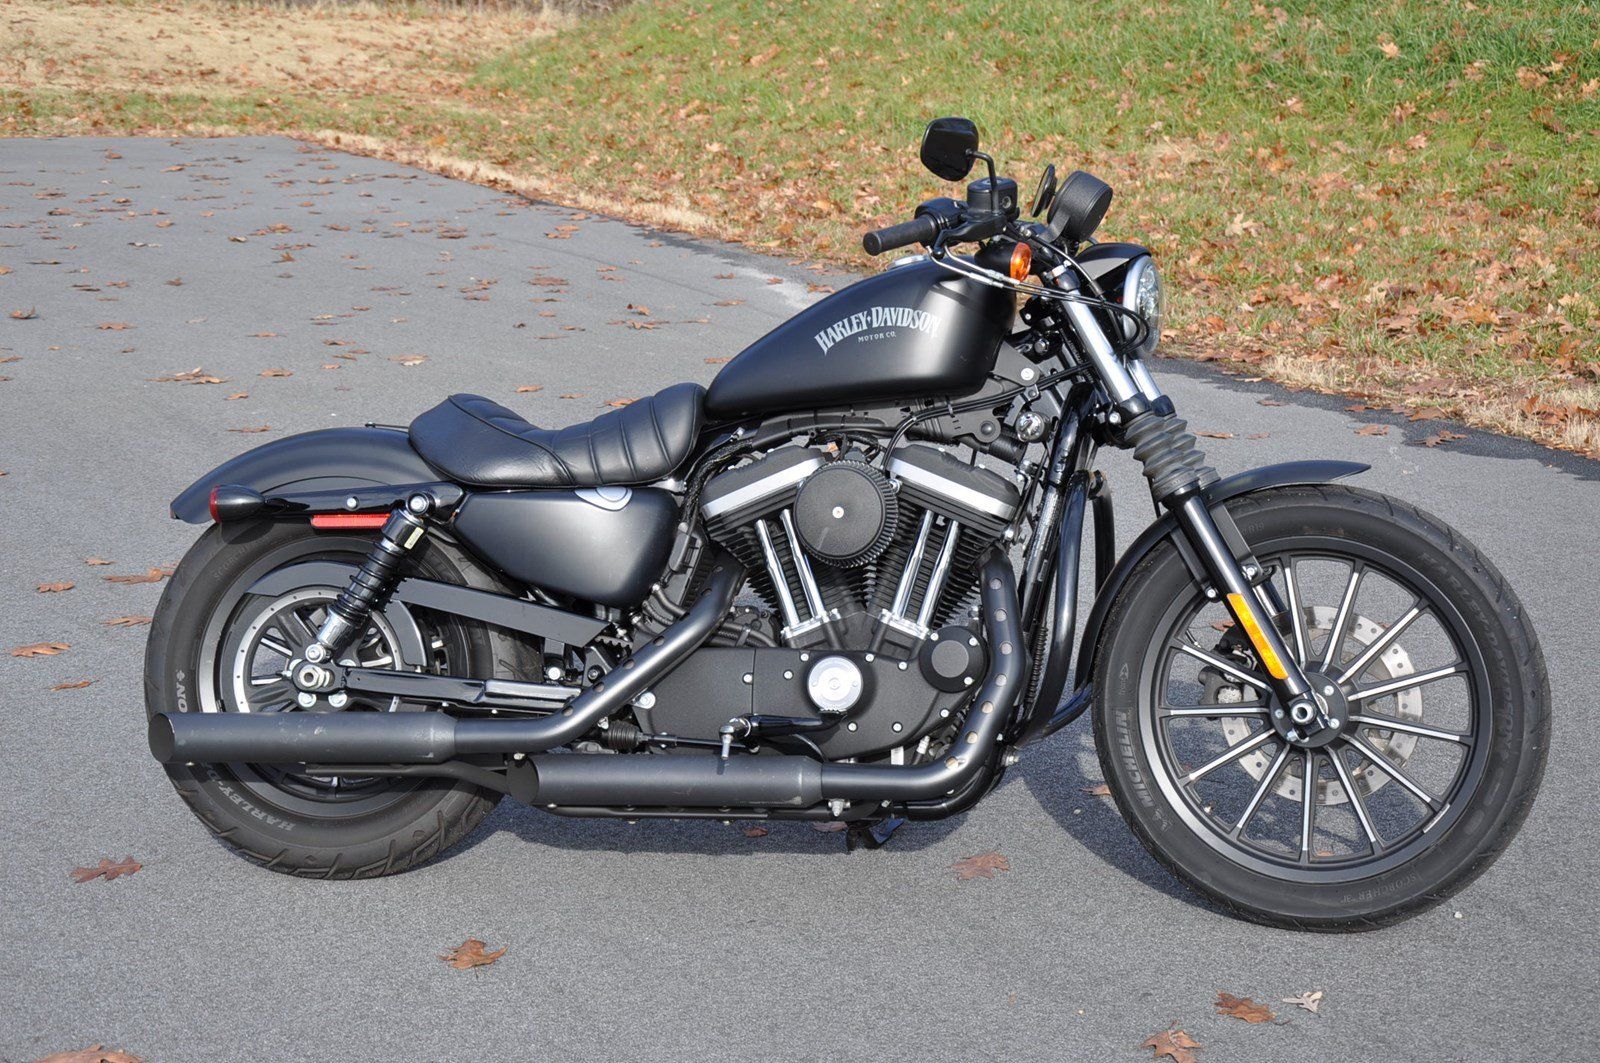 Harley Iron 883 parked on the road